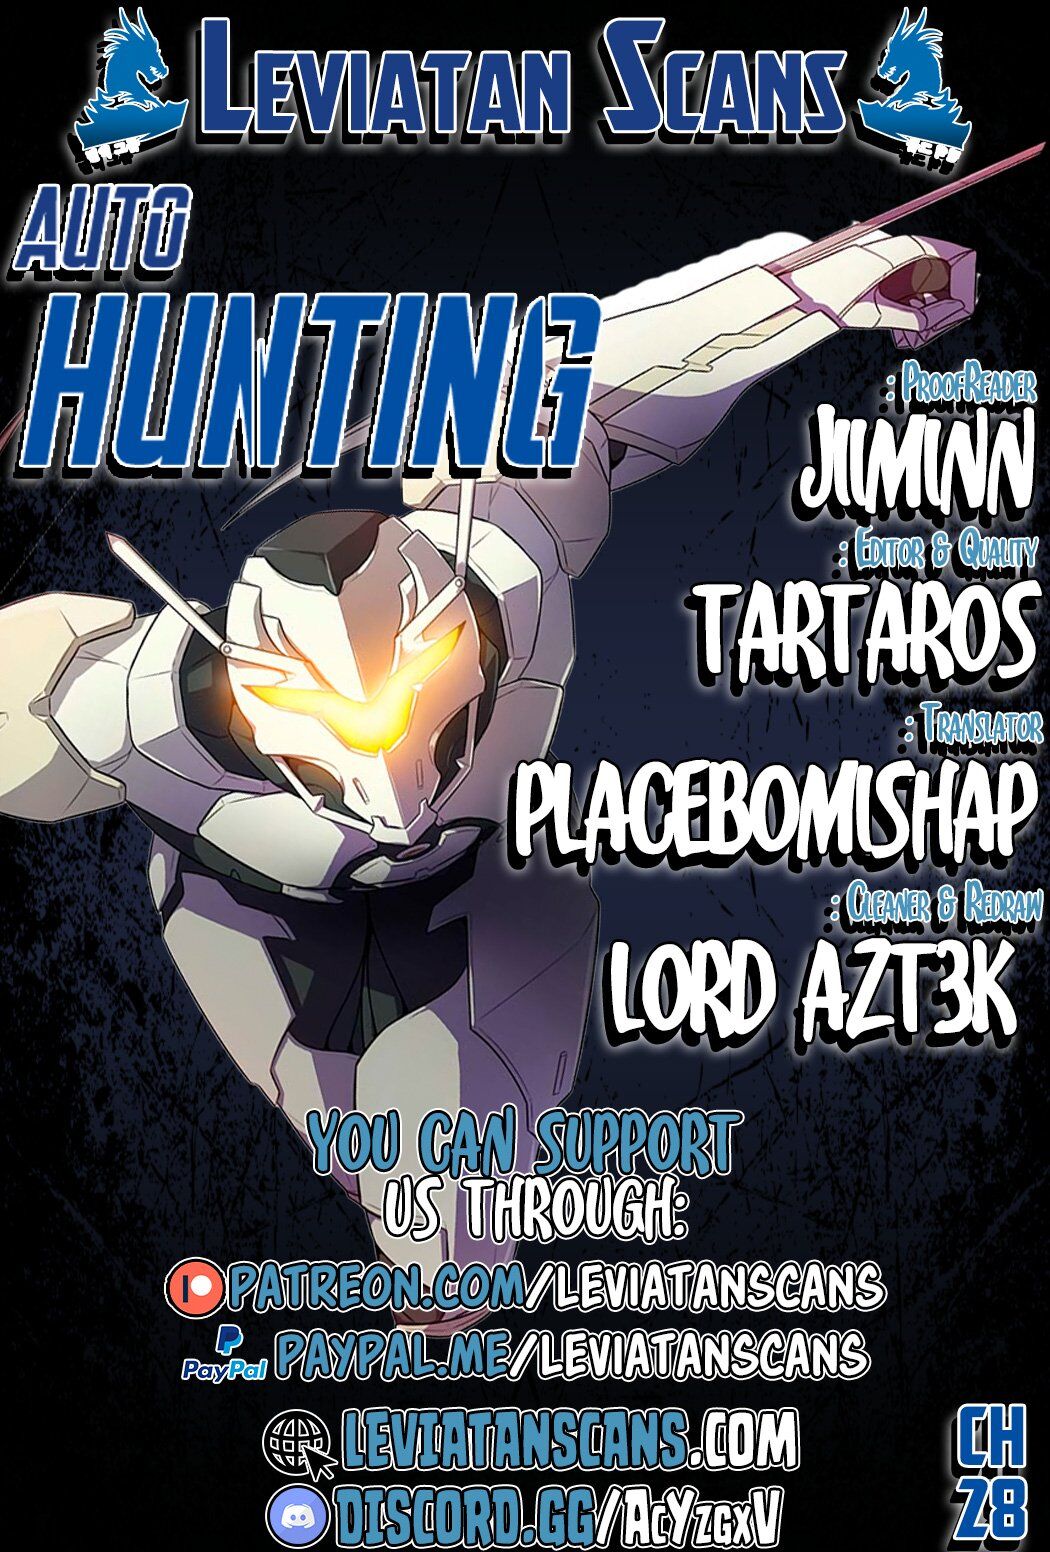 Auto Hunting Chapter 28